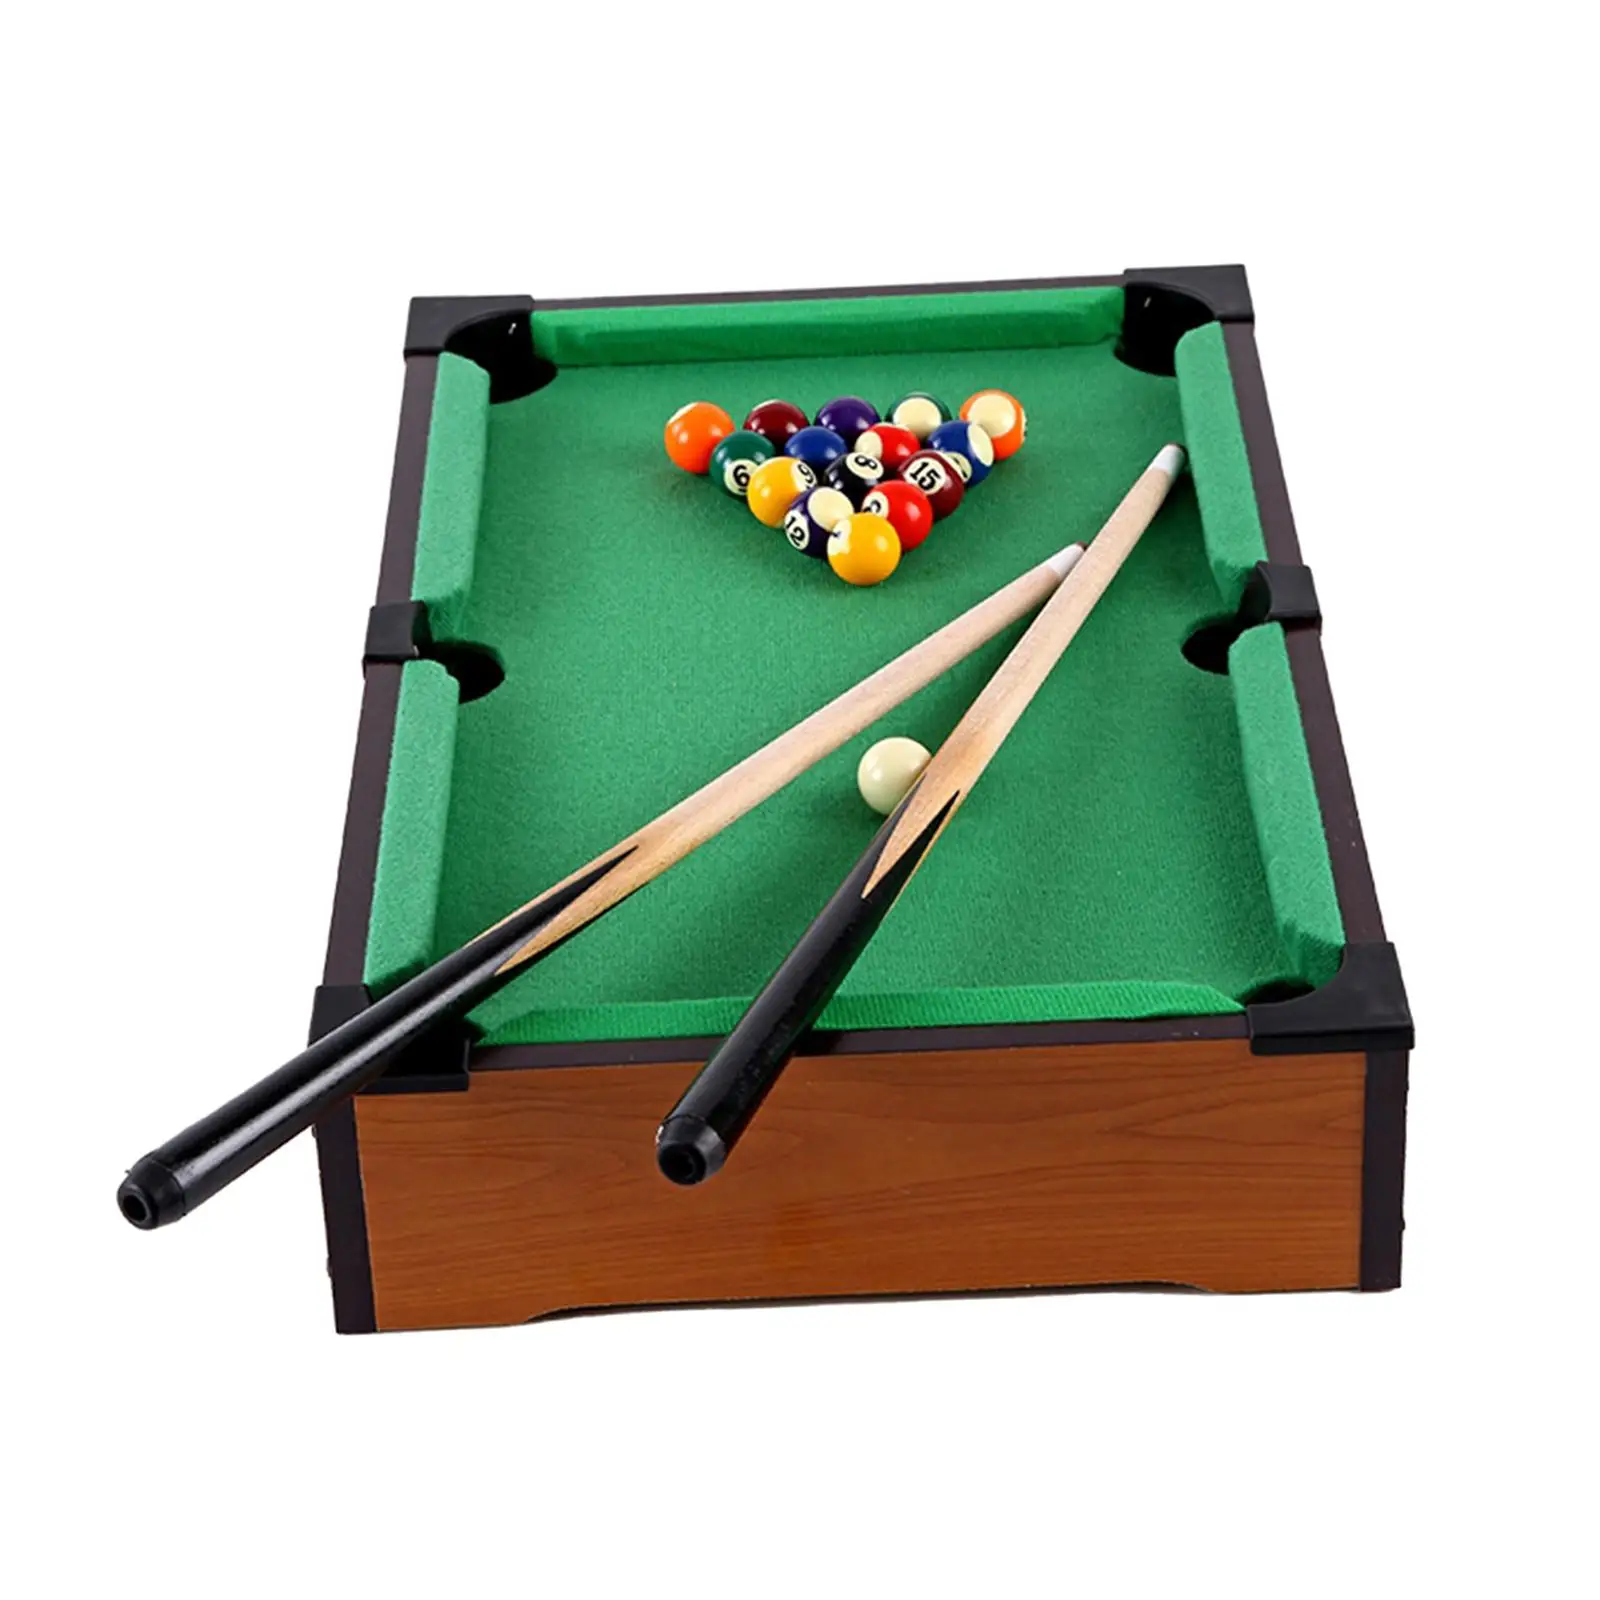 Mini Billiards Portable Mini Pool Table Game Mini Tabletop Pool Set Tabletop Billiards Game Travel Great Gift for Boys and Girls